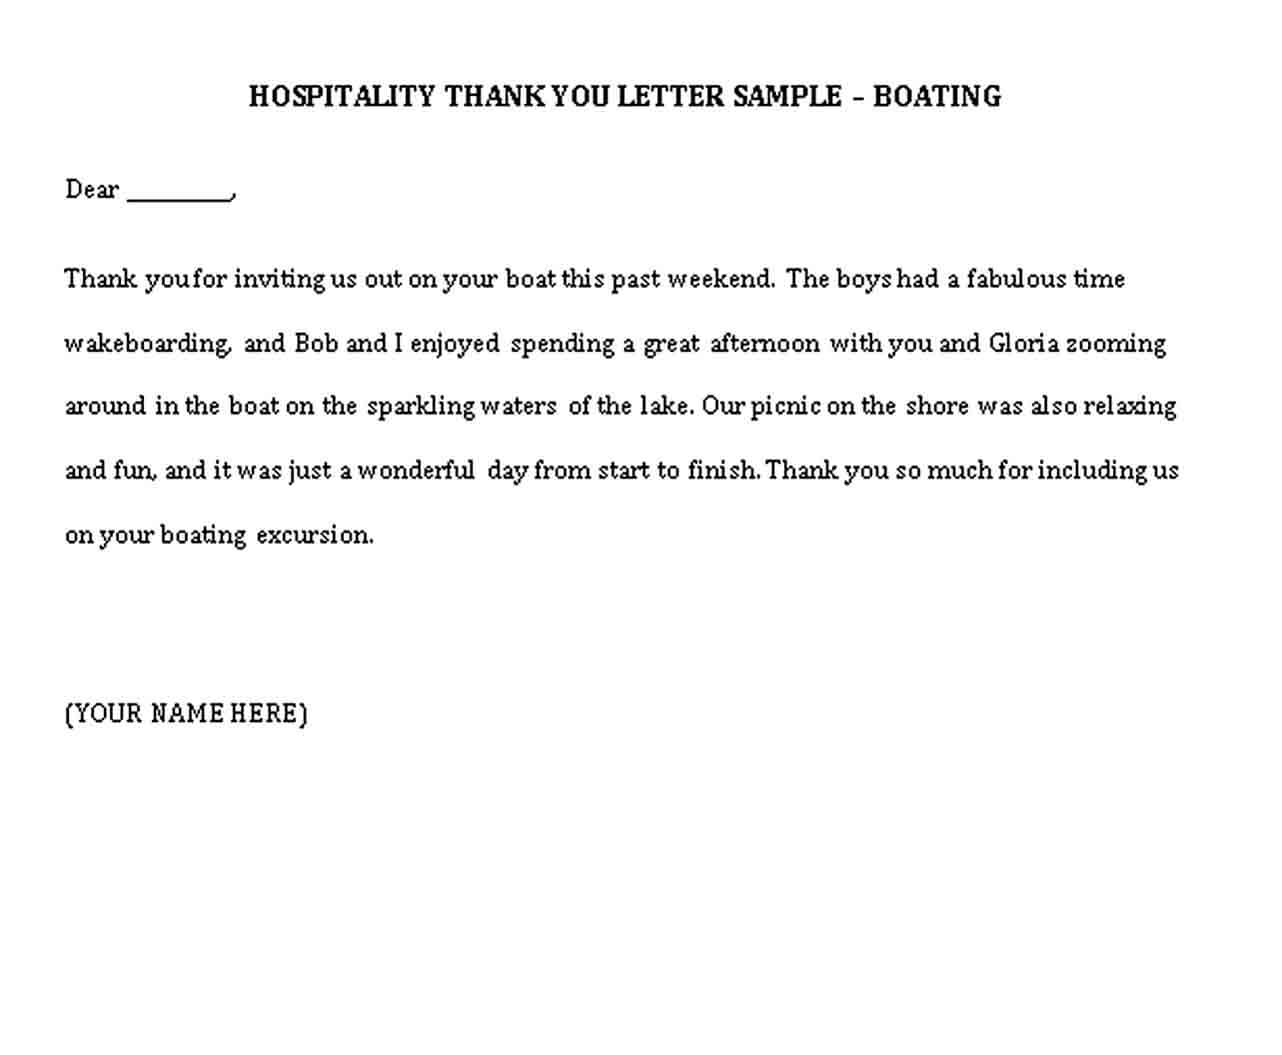 sample hospitality thank you notes1